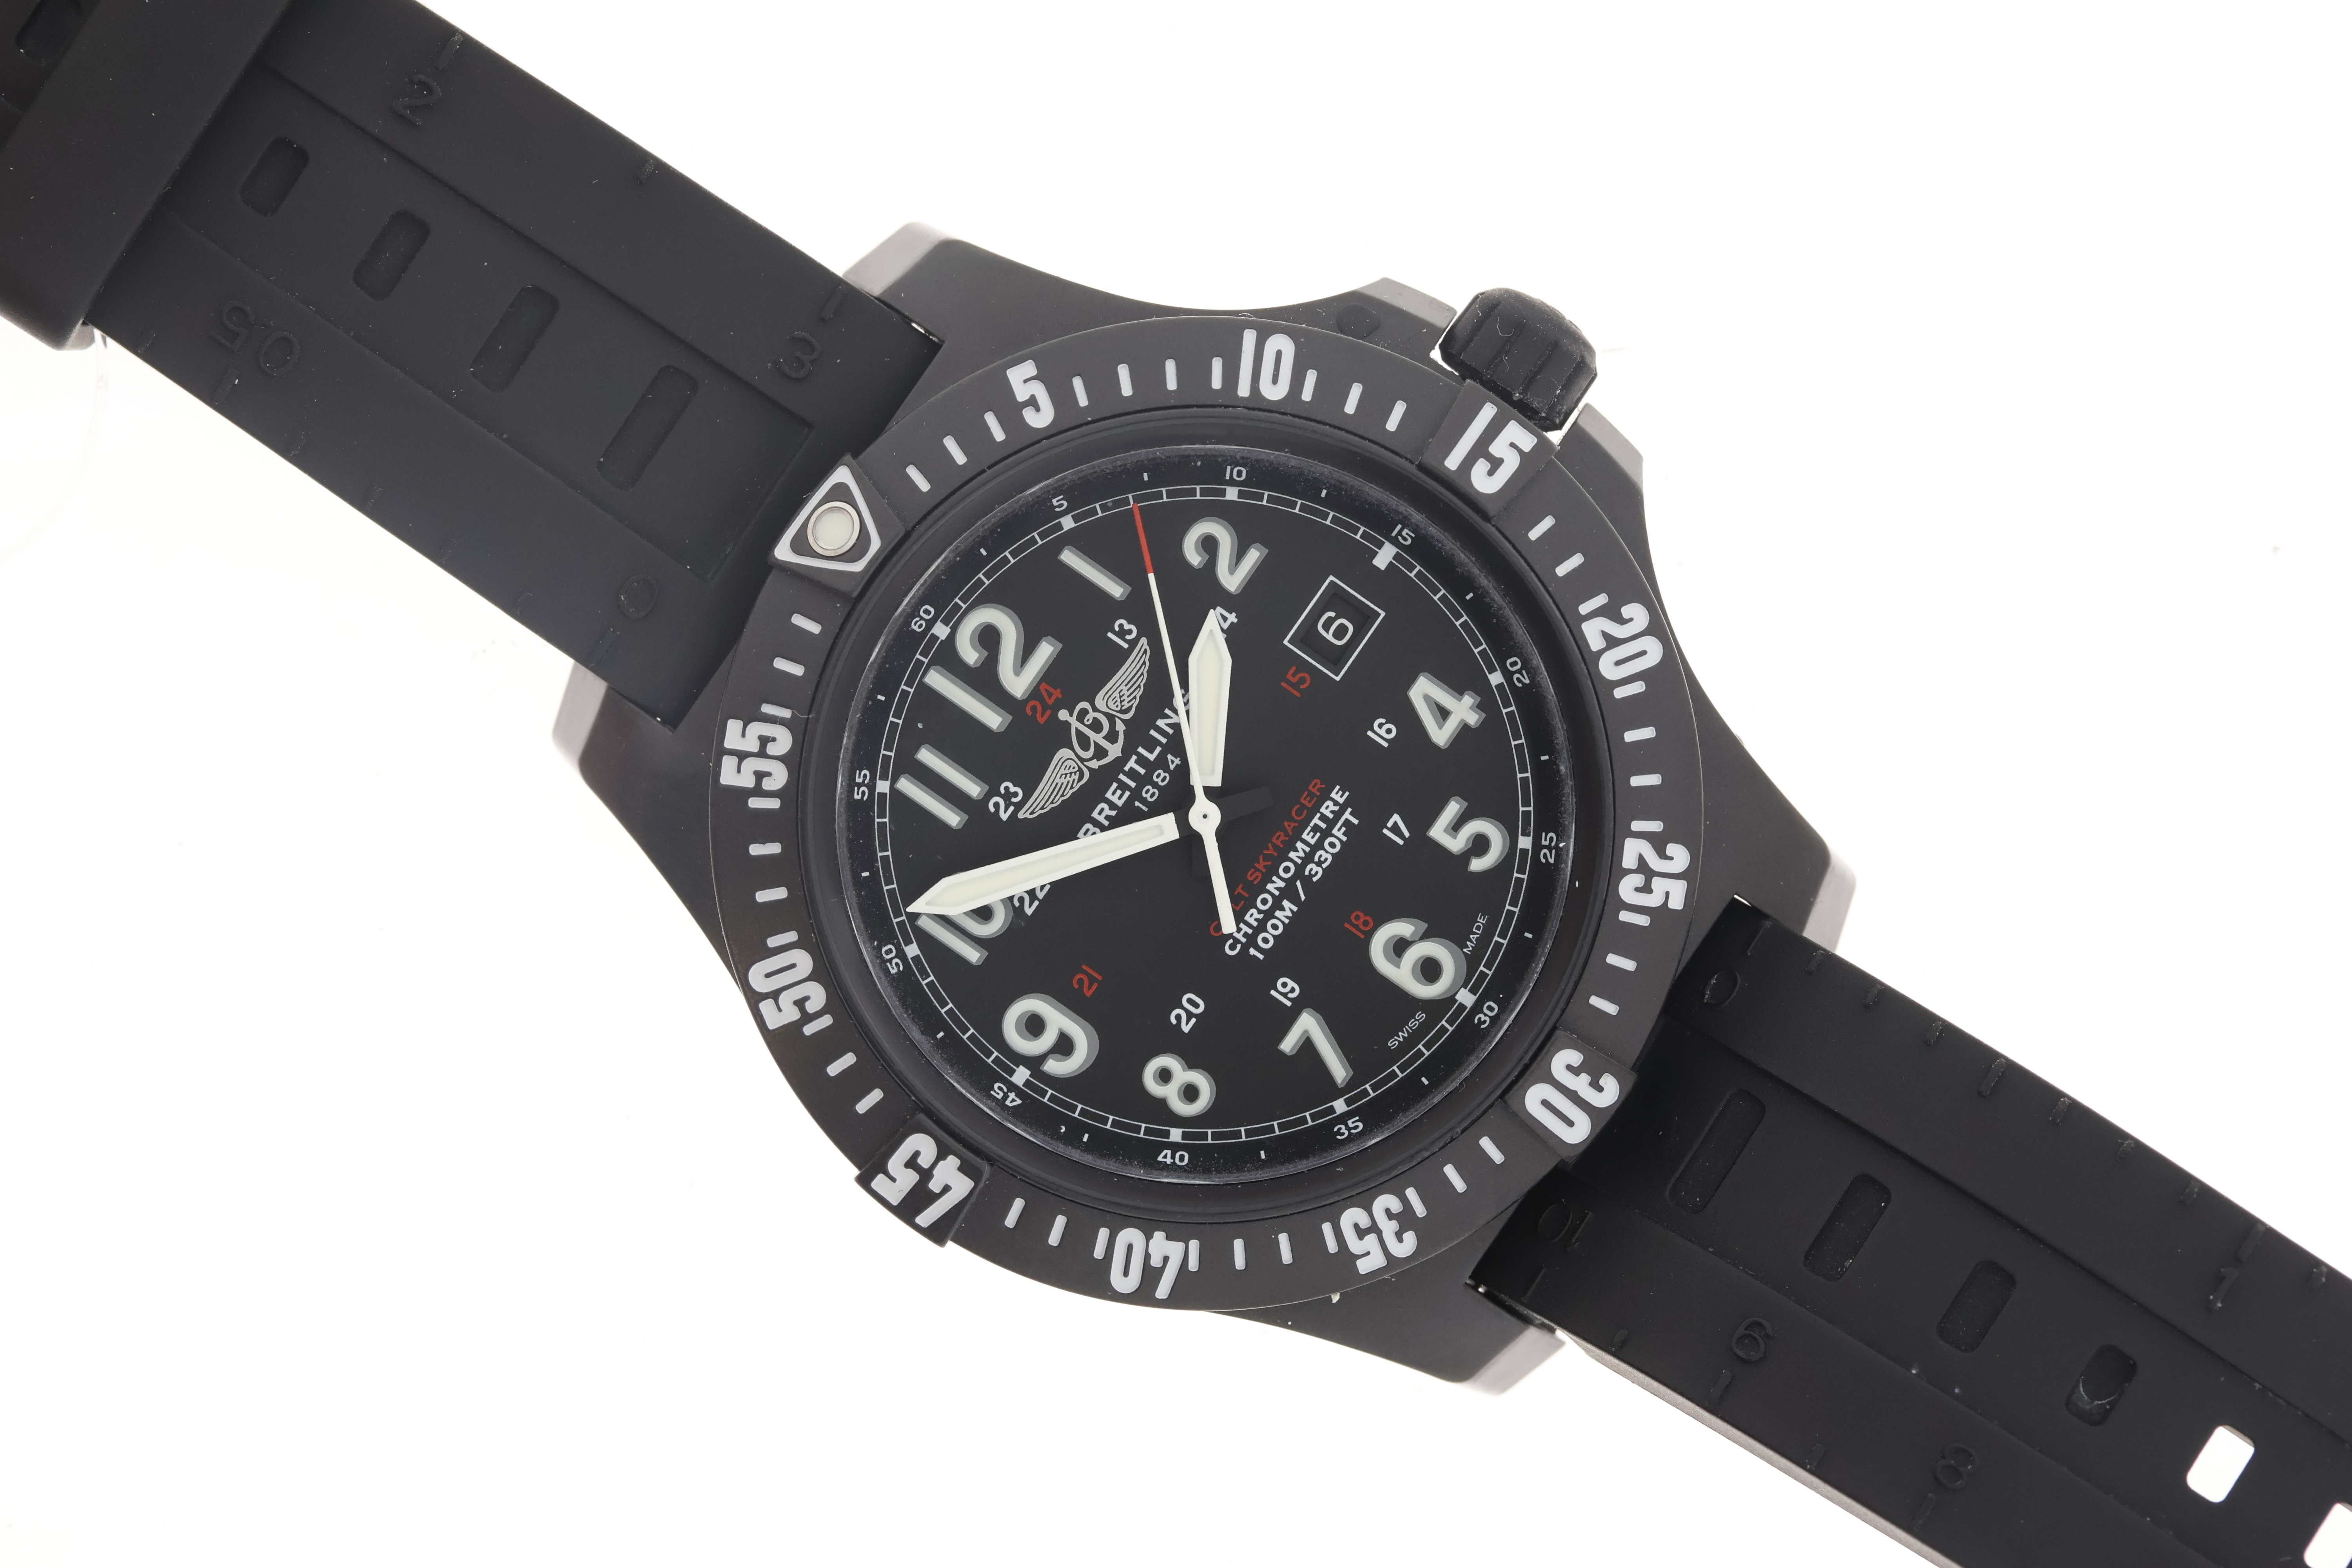 Breitling Colt Skyracer Quartz with Box and Papers 2019 - Image 2 of 4